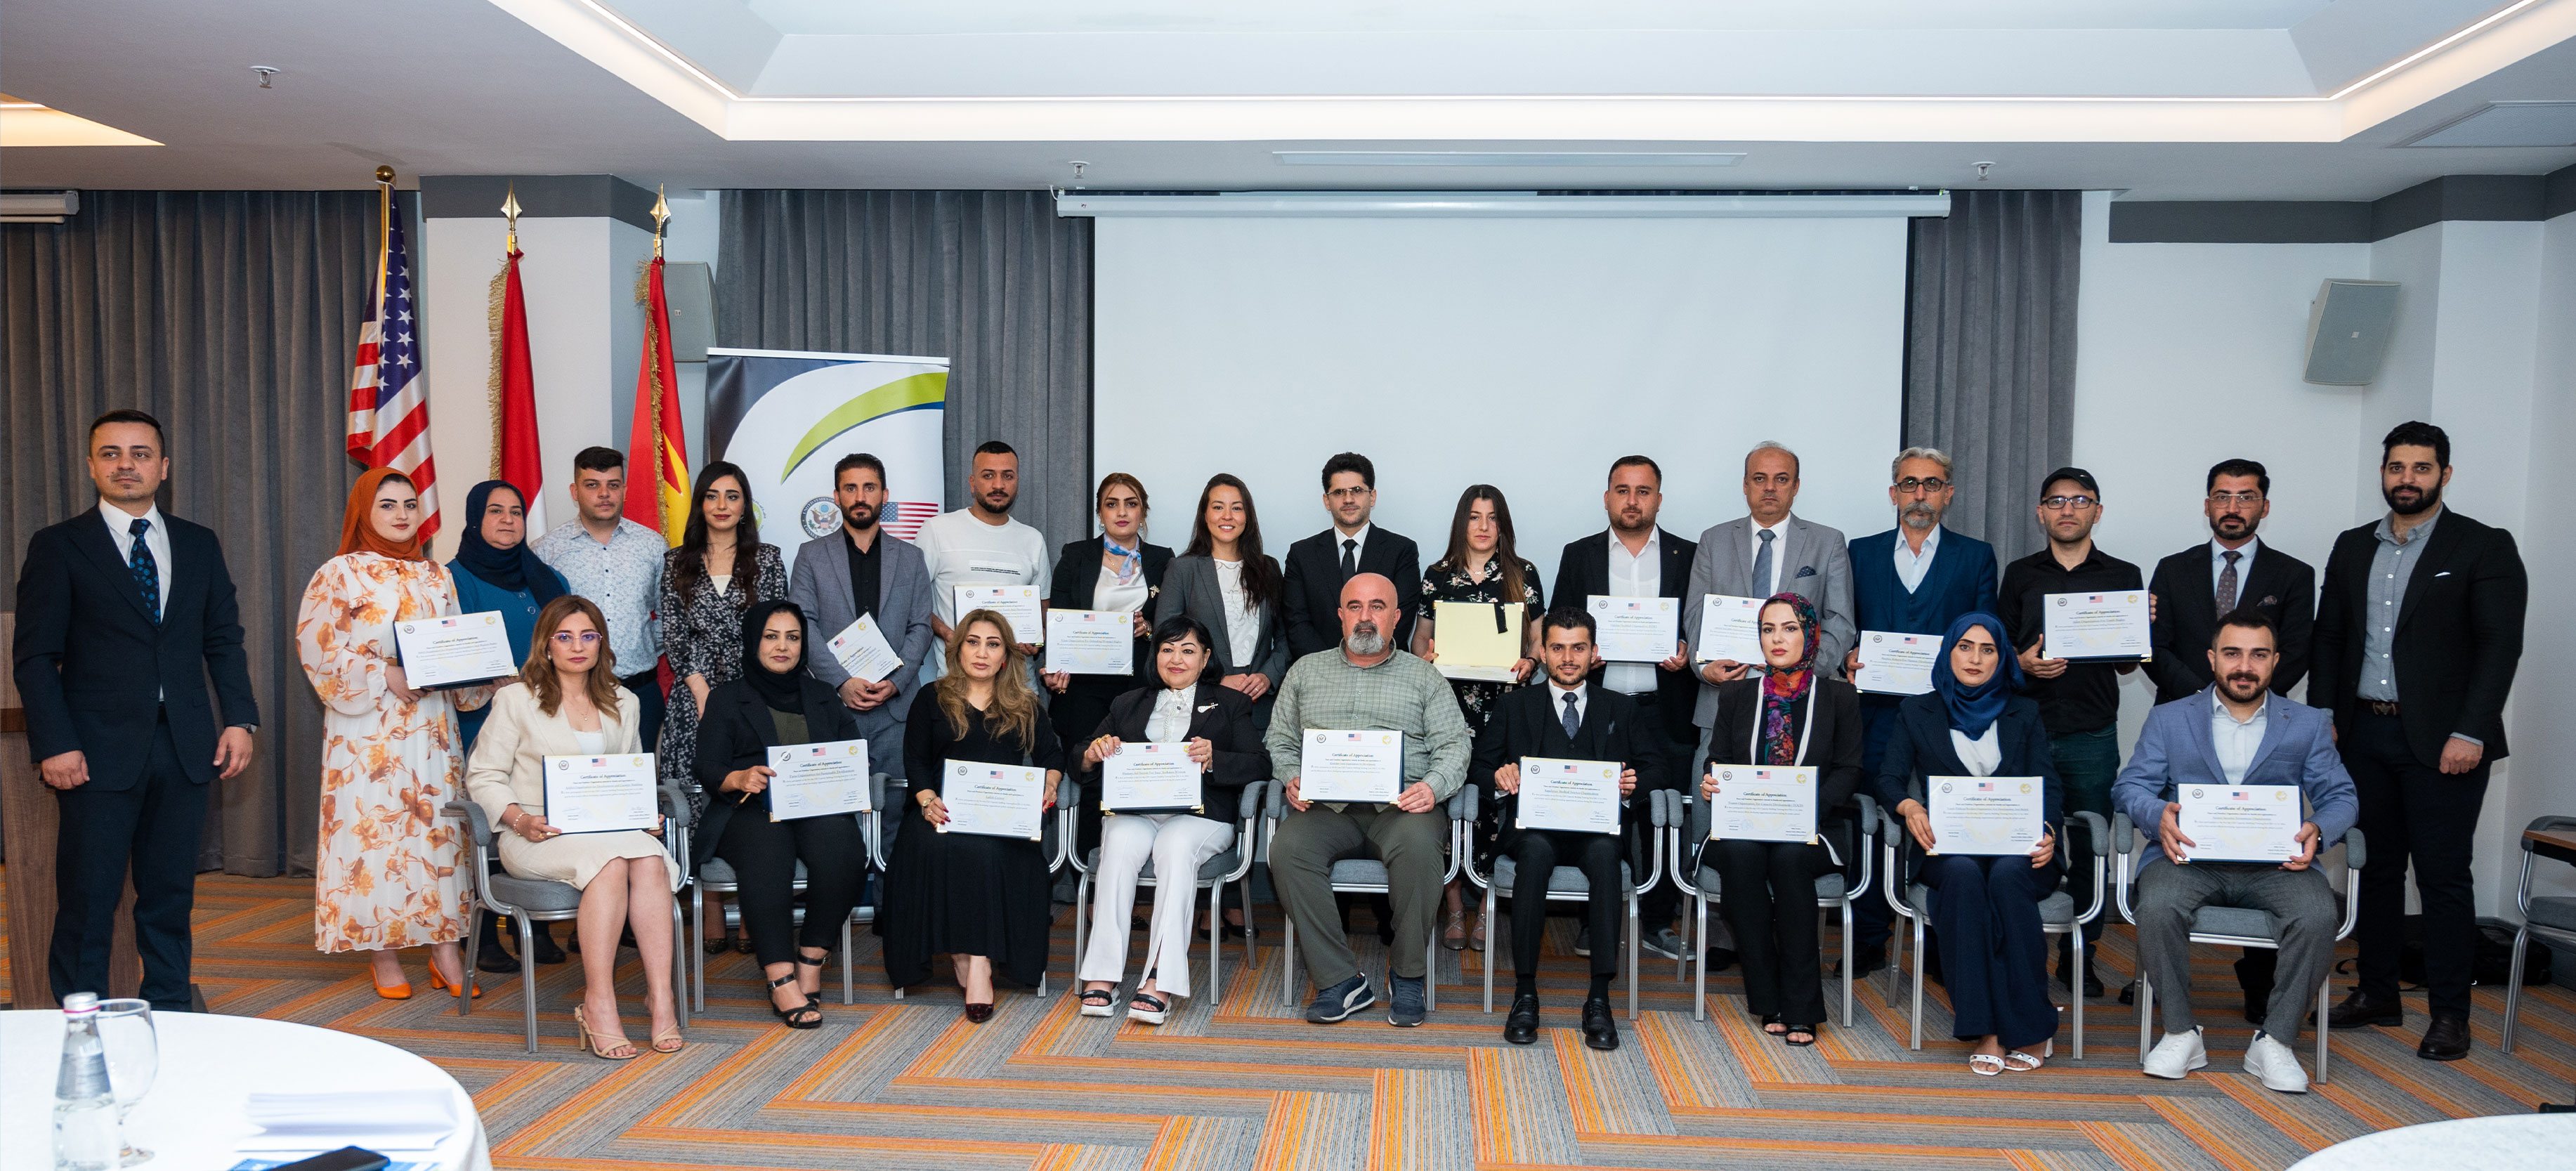 The final conference of the project (civil society organization Boot Camp in the Iraqi Kurdistan region) was held in Erbil